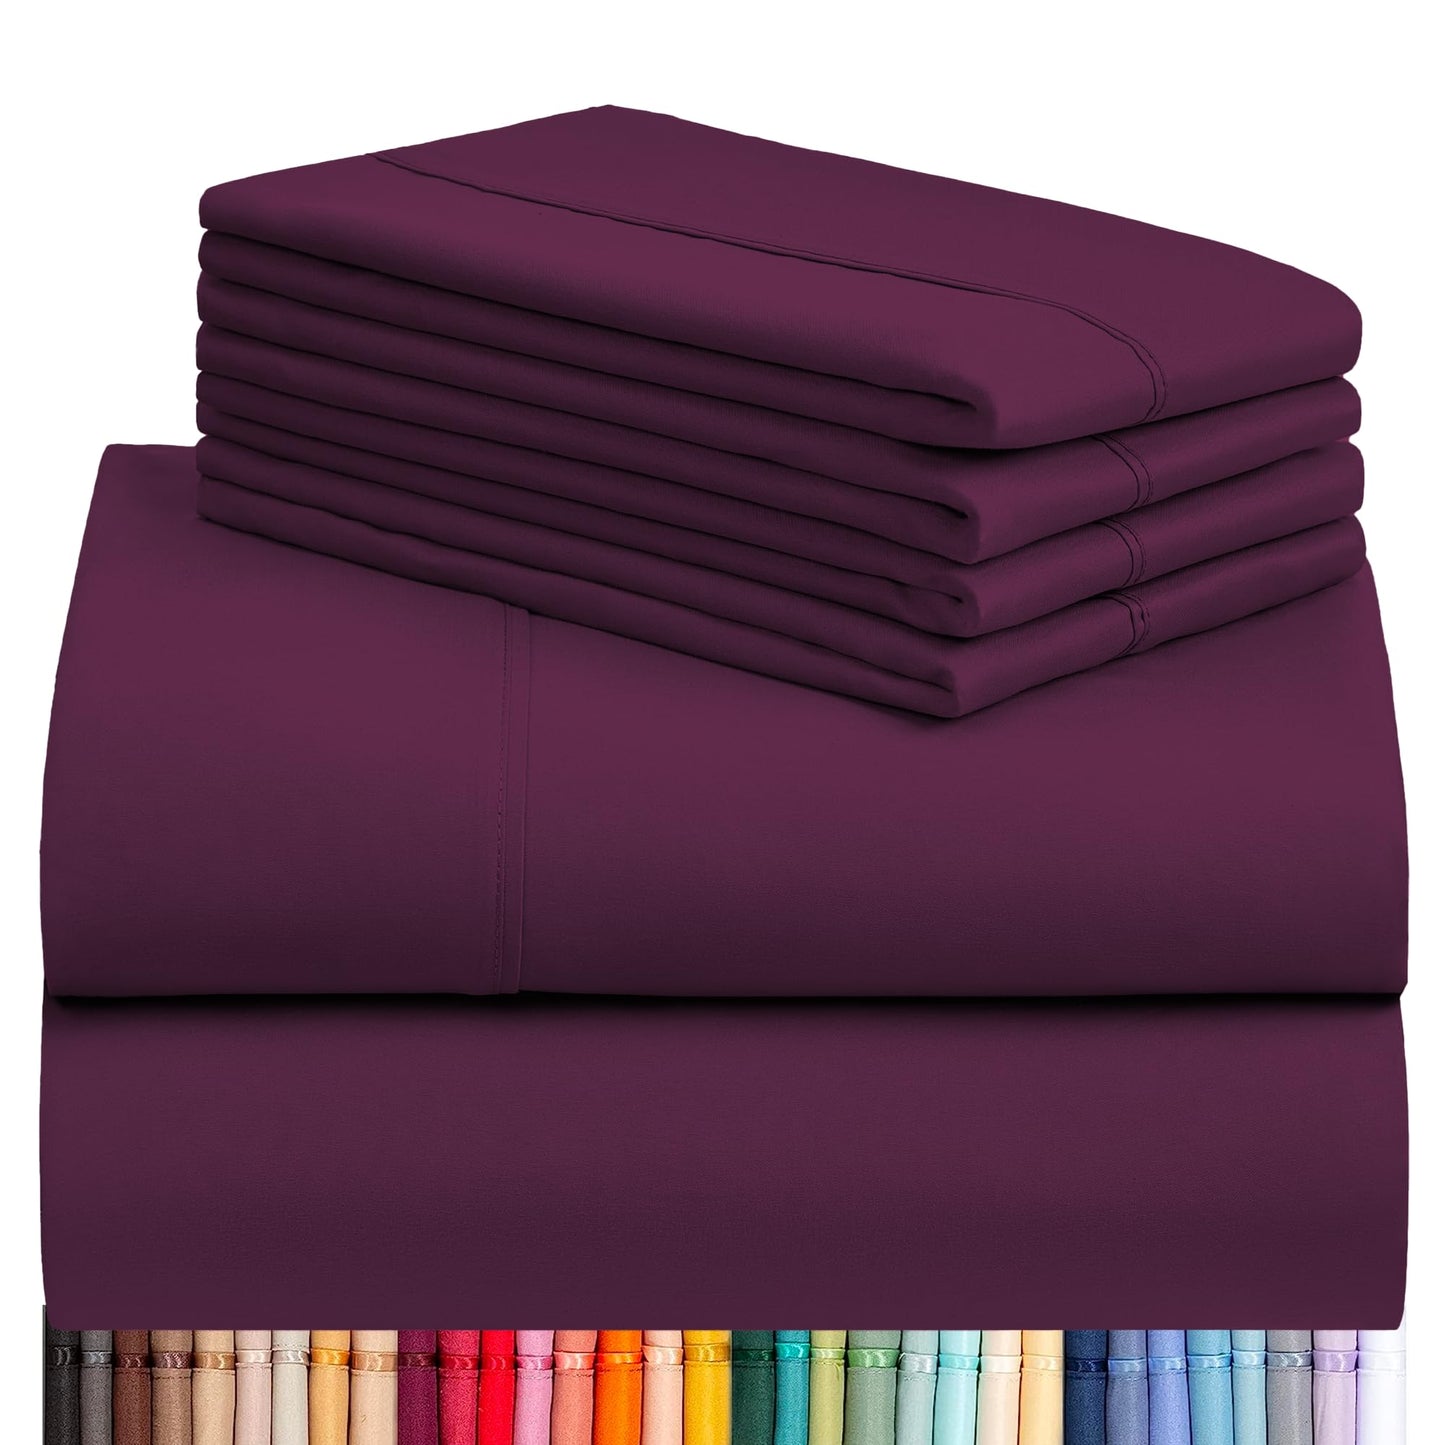 LuxClub 6 PC King Sheet Set, Breathable Luxury Bed Sheets, Deep Pockets 18" Wrinkle Free Cooling Bed Sheets Machine Washable Hotel Bedding Silky Soft - Eggplant King